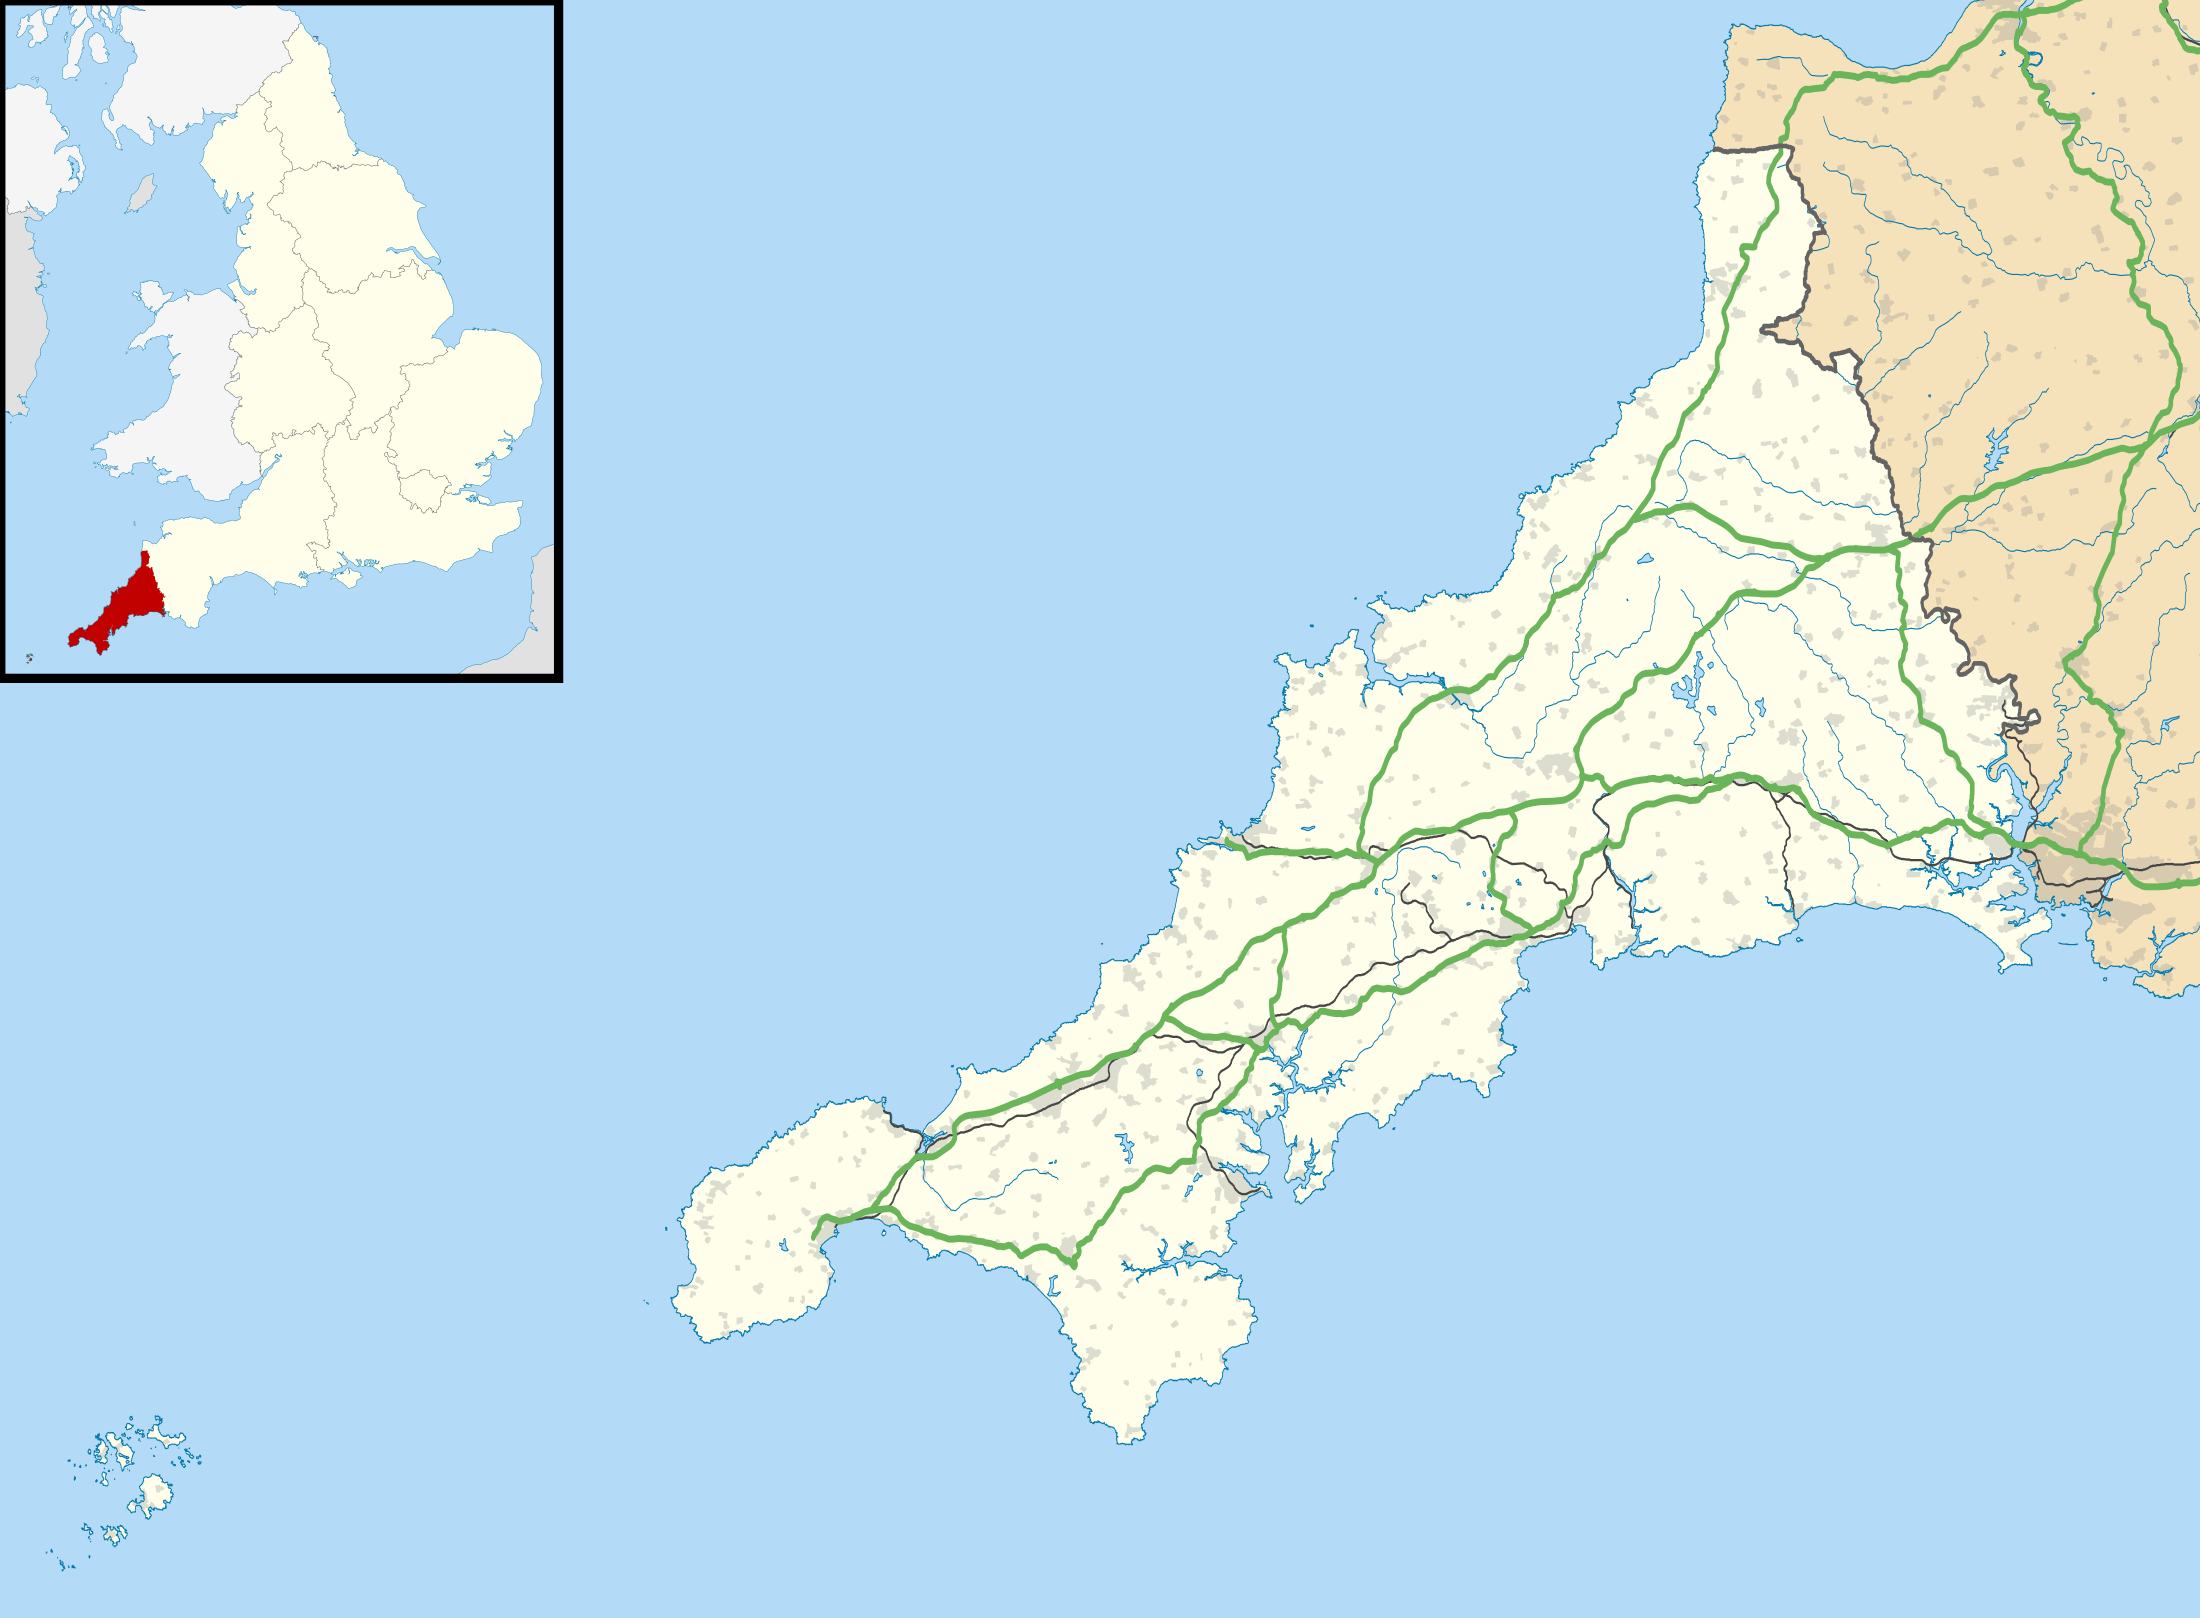 A map showing Cornwall and the Isles of Scilly, with major roads marked. Inset in top-left corner shows Cornwall within the UK